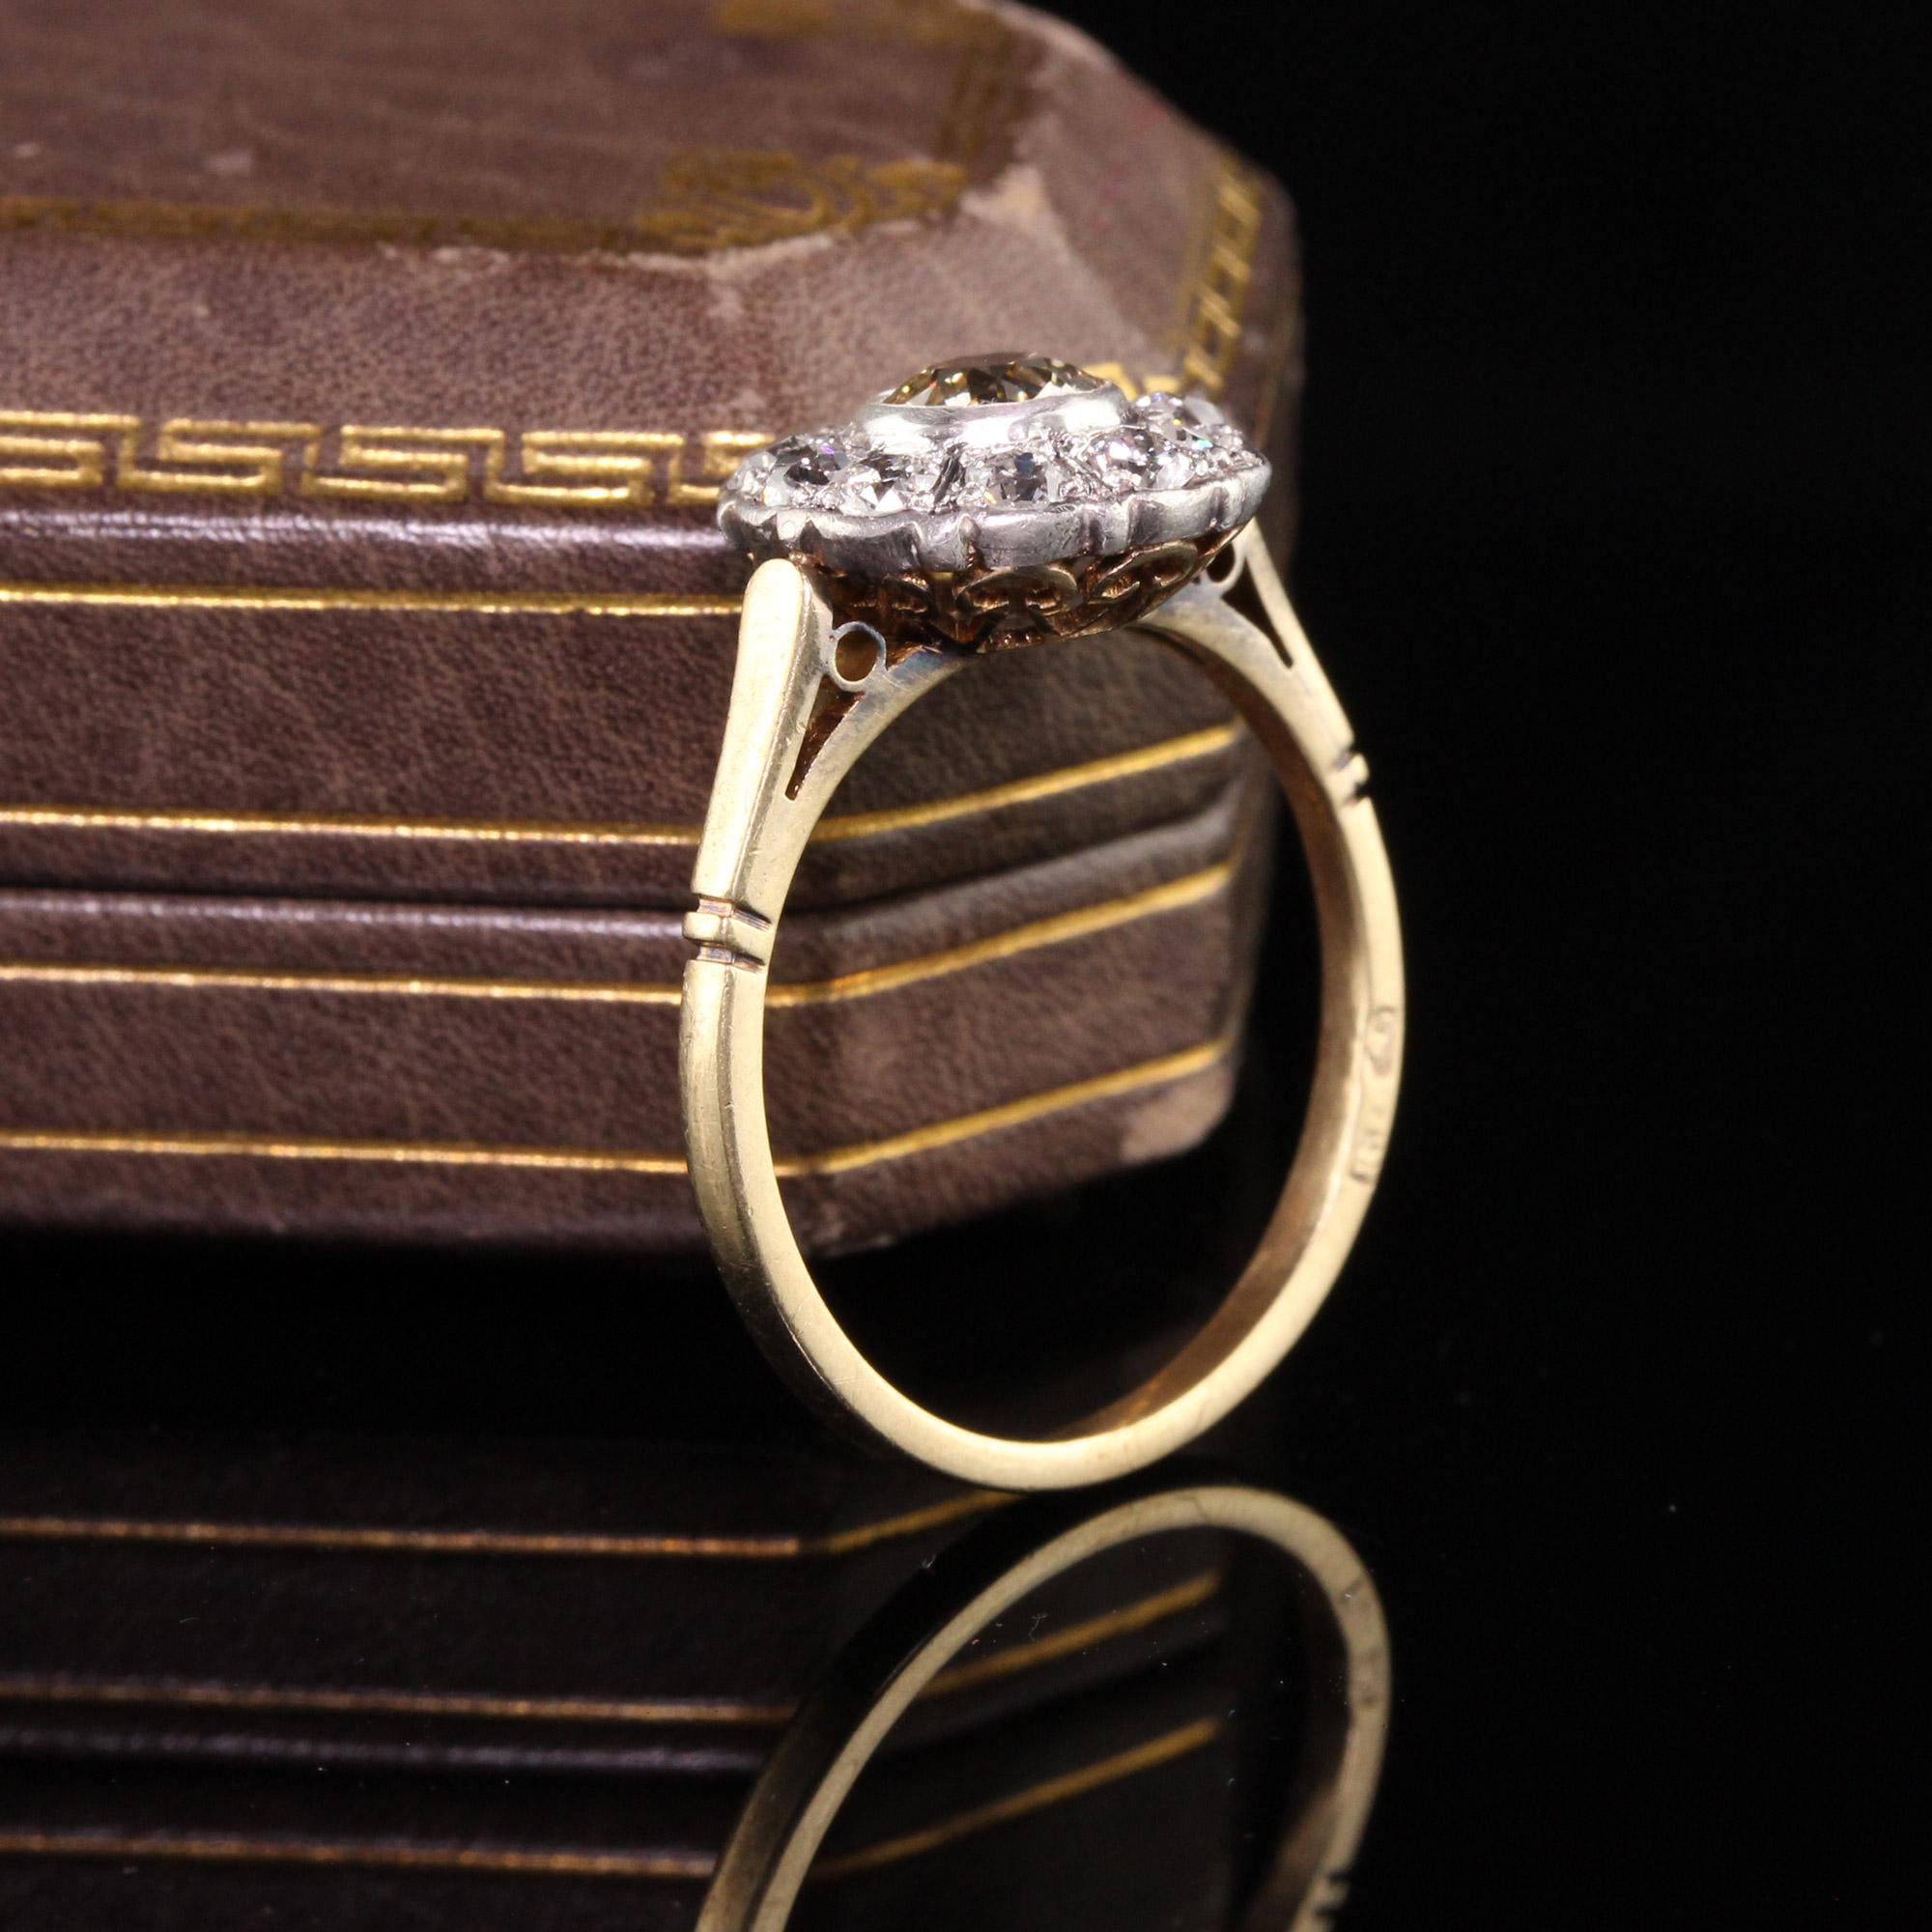 Beautiful Antique Art Deco 14K Yellow Gold Old Mine Diamond Halo Engagement Ring. This gorgeous ring features an old mine diamond in the center surrounded by old mine diamonds.

Item #R0849

Metal: 14K Yellow Gold and Silver Top

Center Diamond: